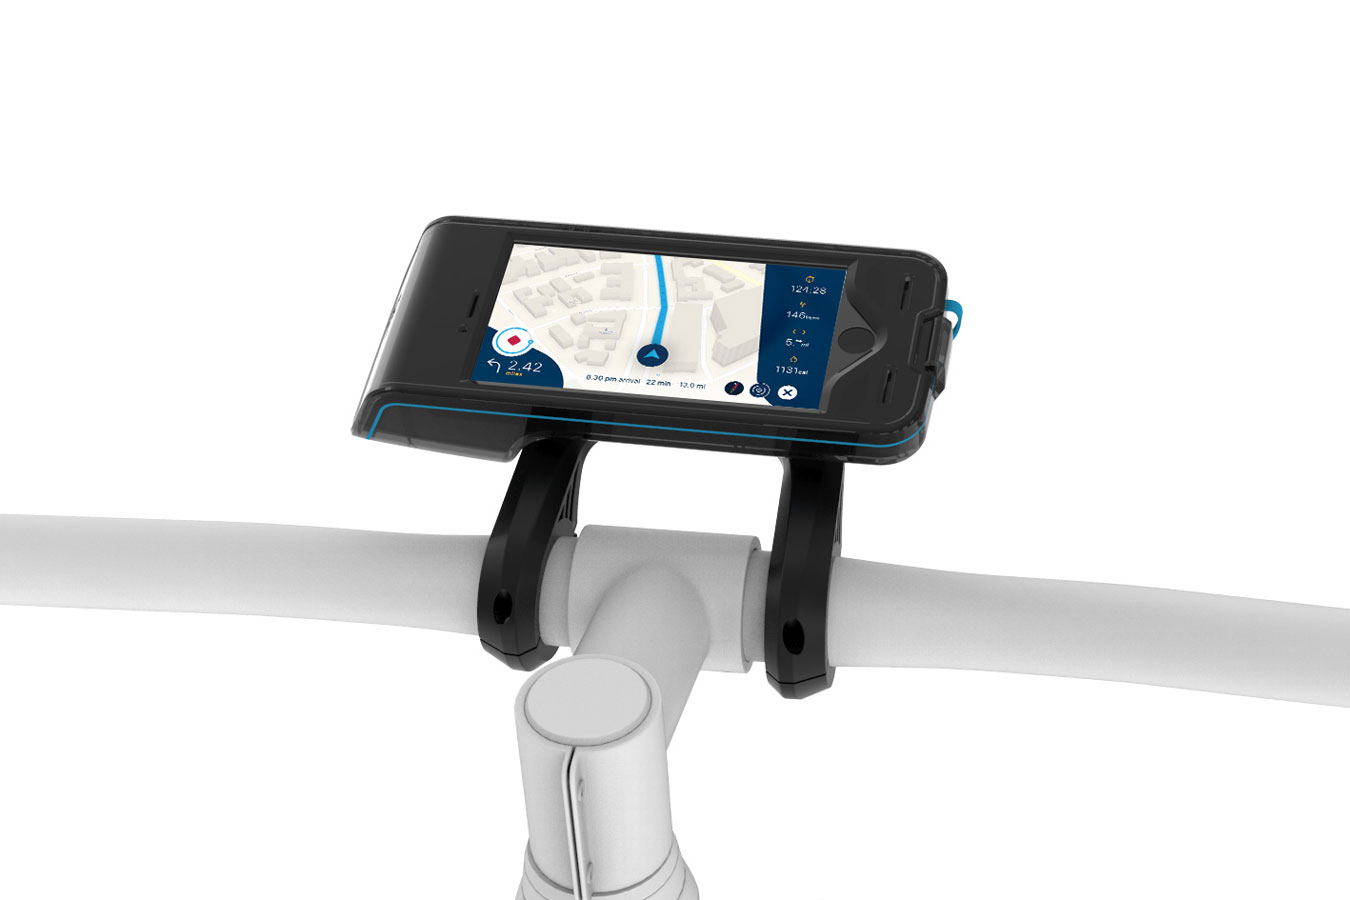 bycle case and app turns iphone into bike computer for tracking rides mount 4